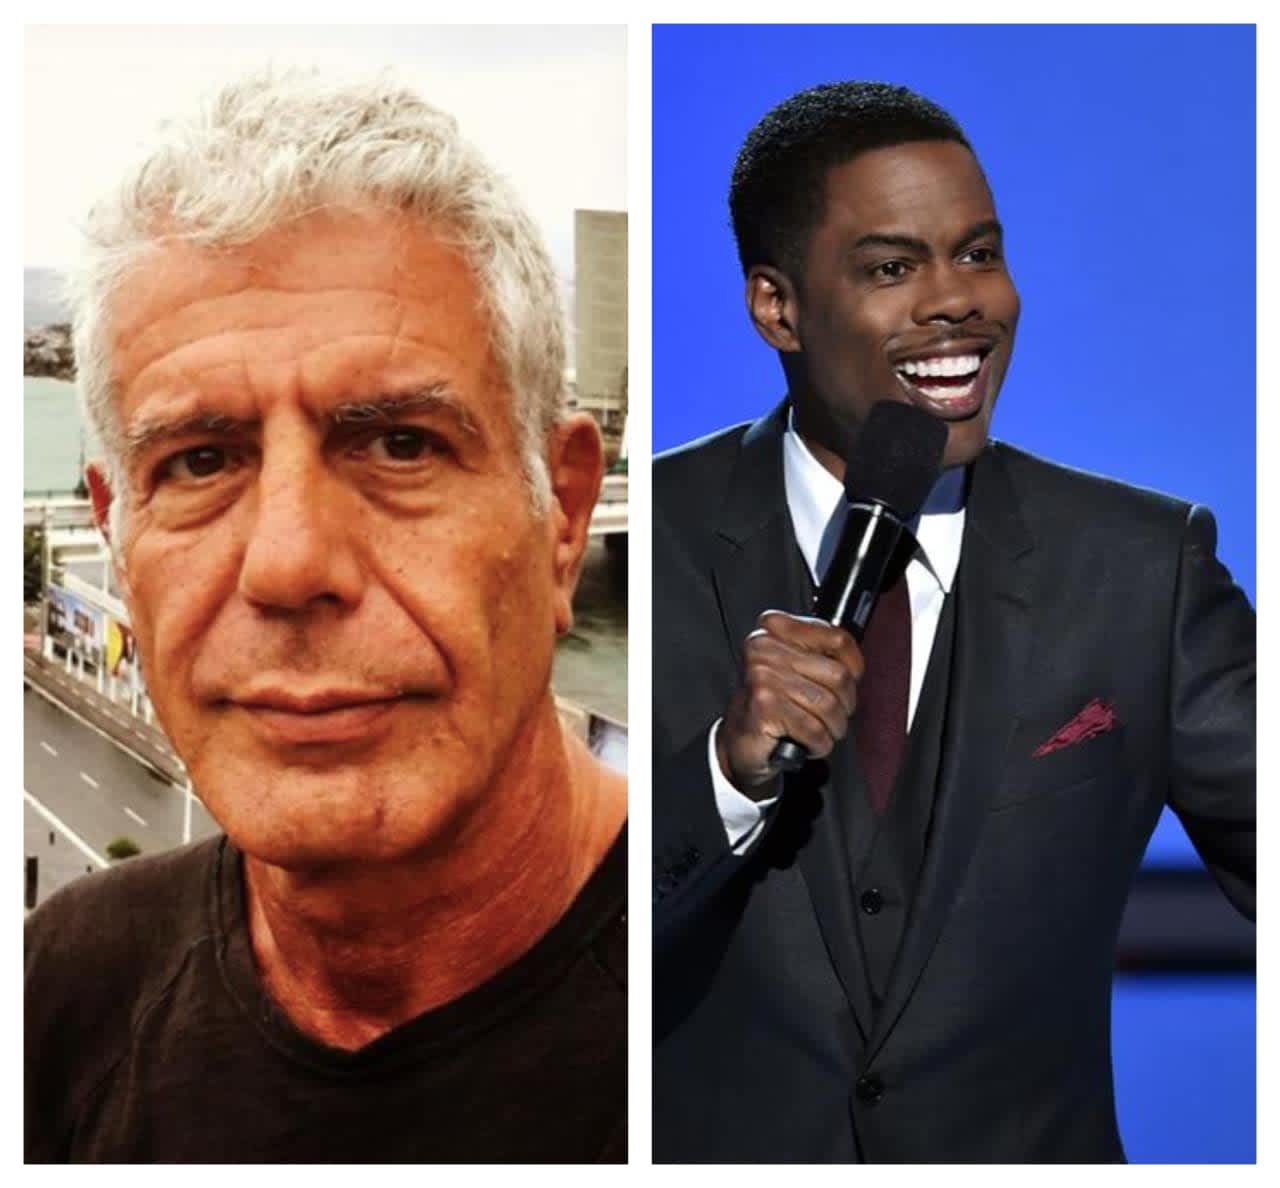 Chris Rock and Anthony Bourdain are among the many North Jersey natives nominated for the New Jersey Hall of Fame's 11th class.